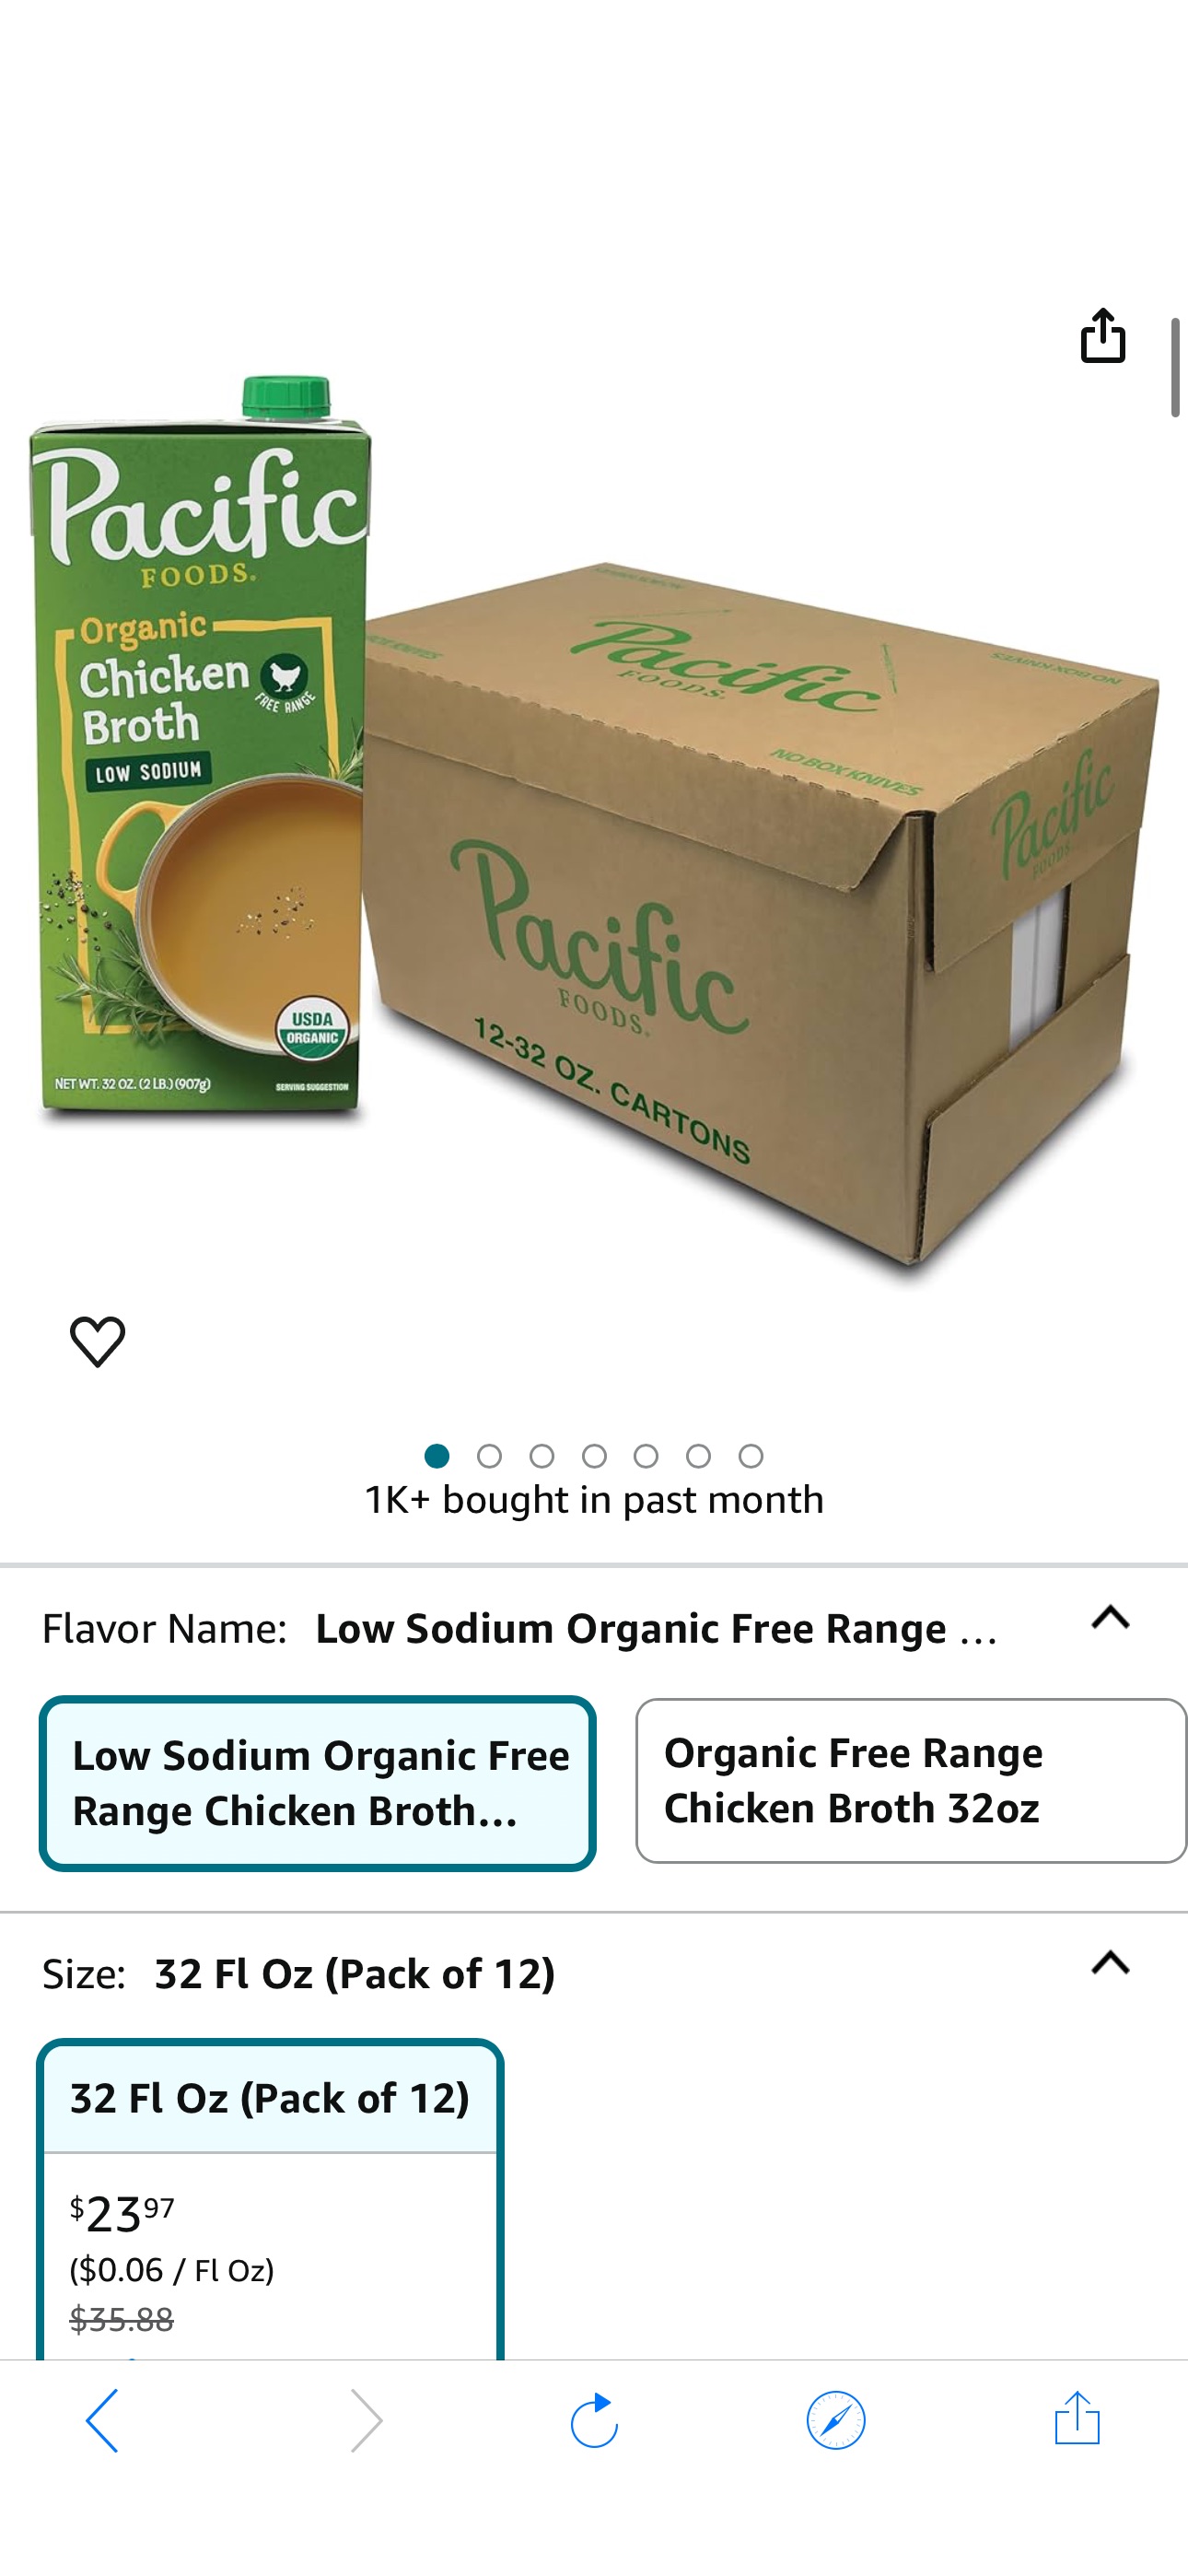 Amazon.com : Pacific Foods Low Sodium Organic Free Range Chicken Broth, 32 oz Carton (Case of 12) : Packaged Chicken Bouillons : Grocery & Gourmet Food